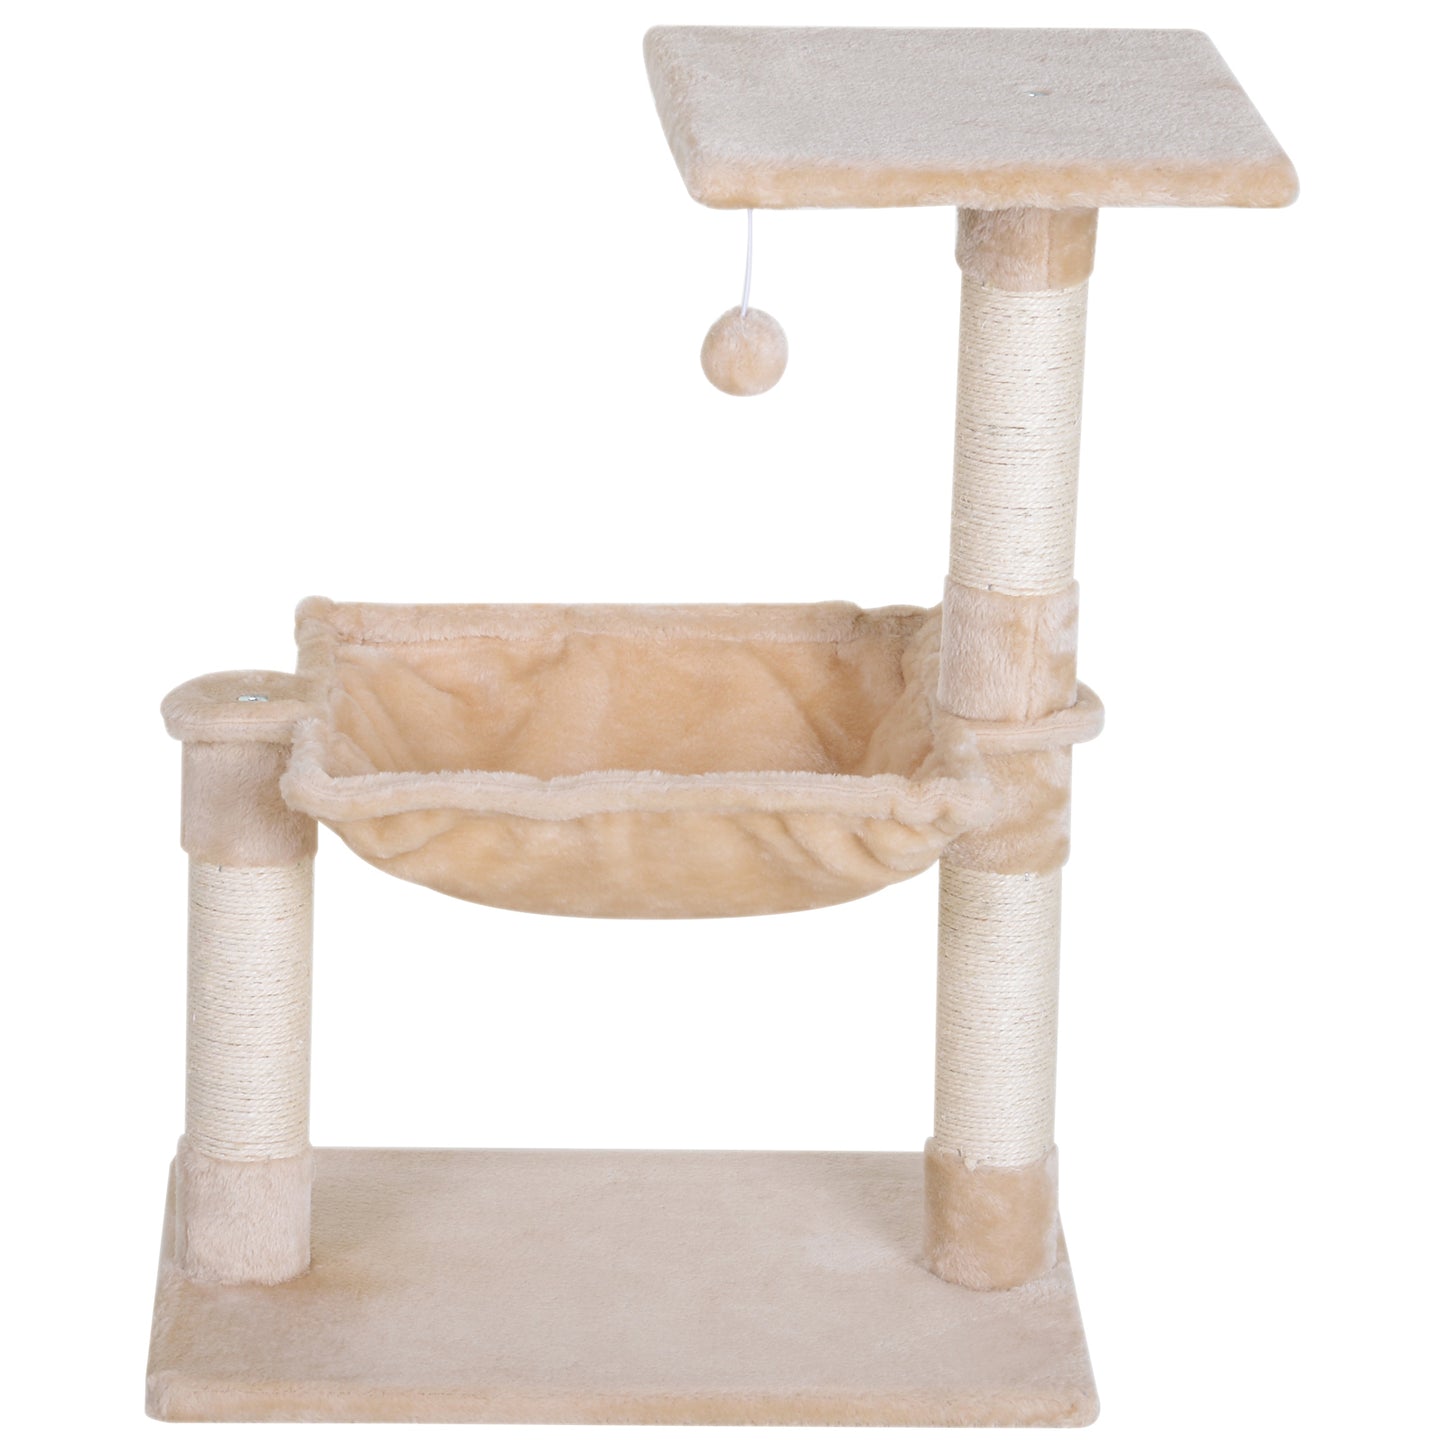 PawHut Cat Tree Hammock Bed Natural Sisal Scratching Post w/ Dangle Toy 2 Tier 70cm Pet Scratch Stand